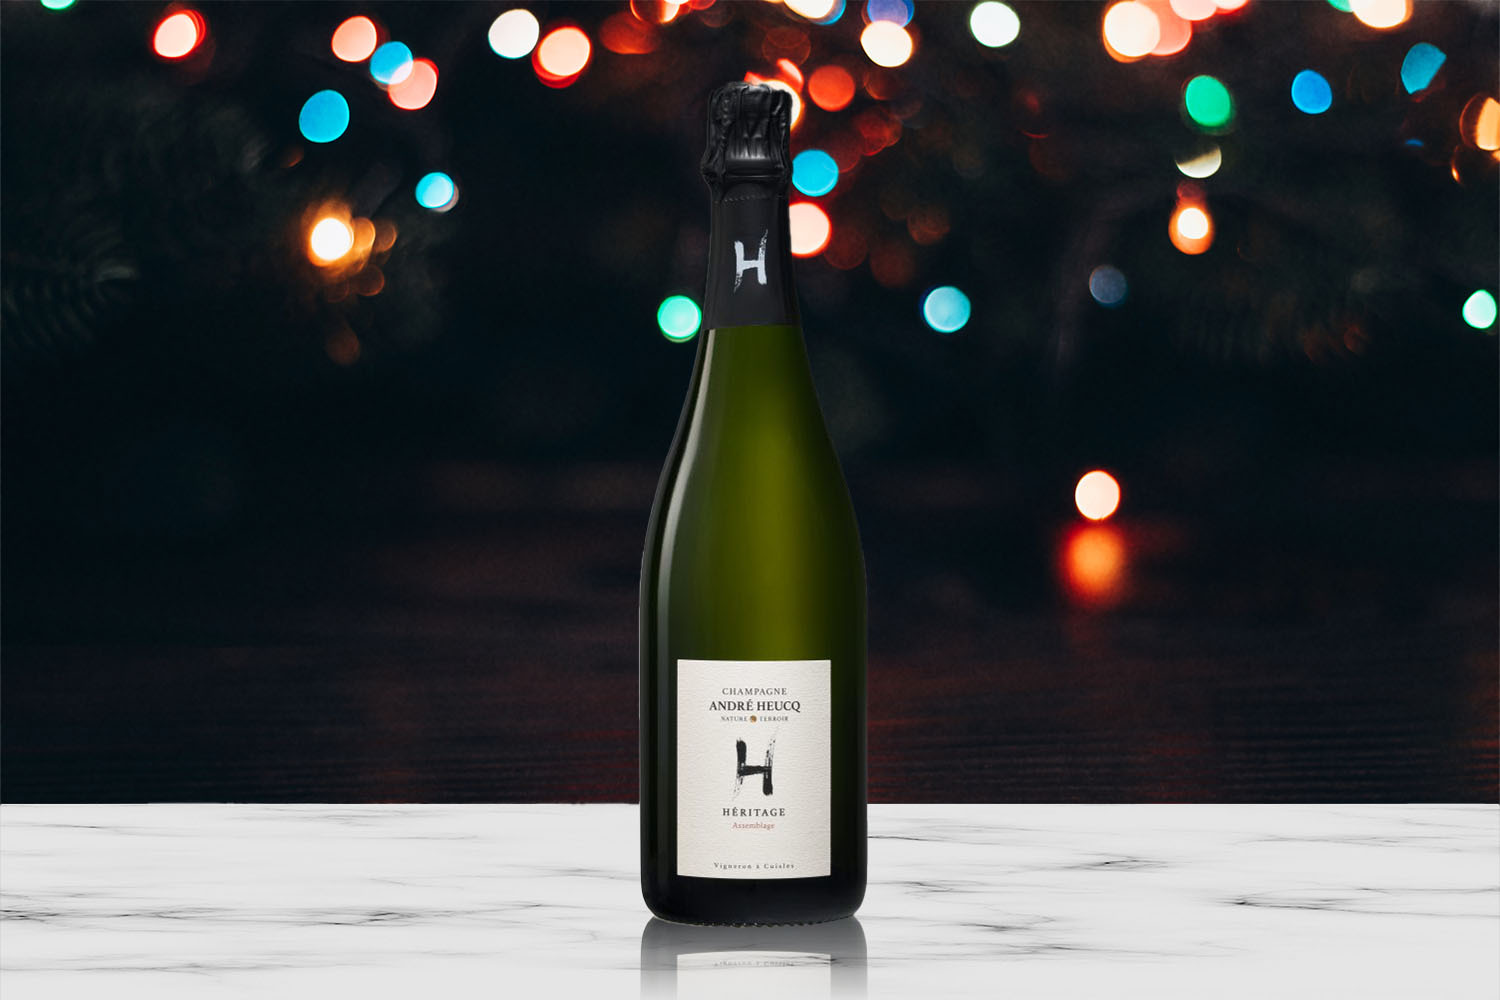 Champagne André Heucq Héritage Assemblage in front of holiday lights